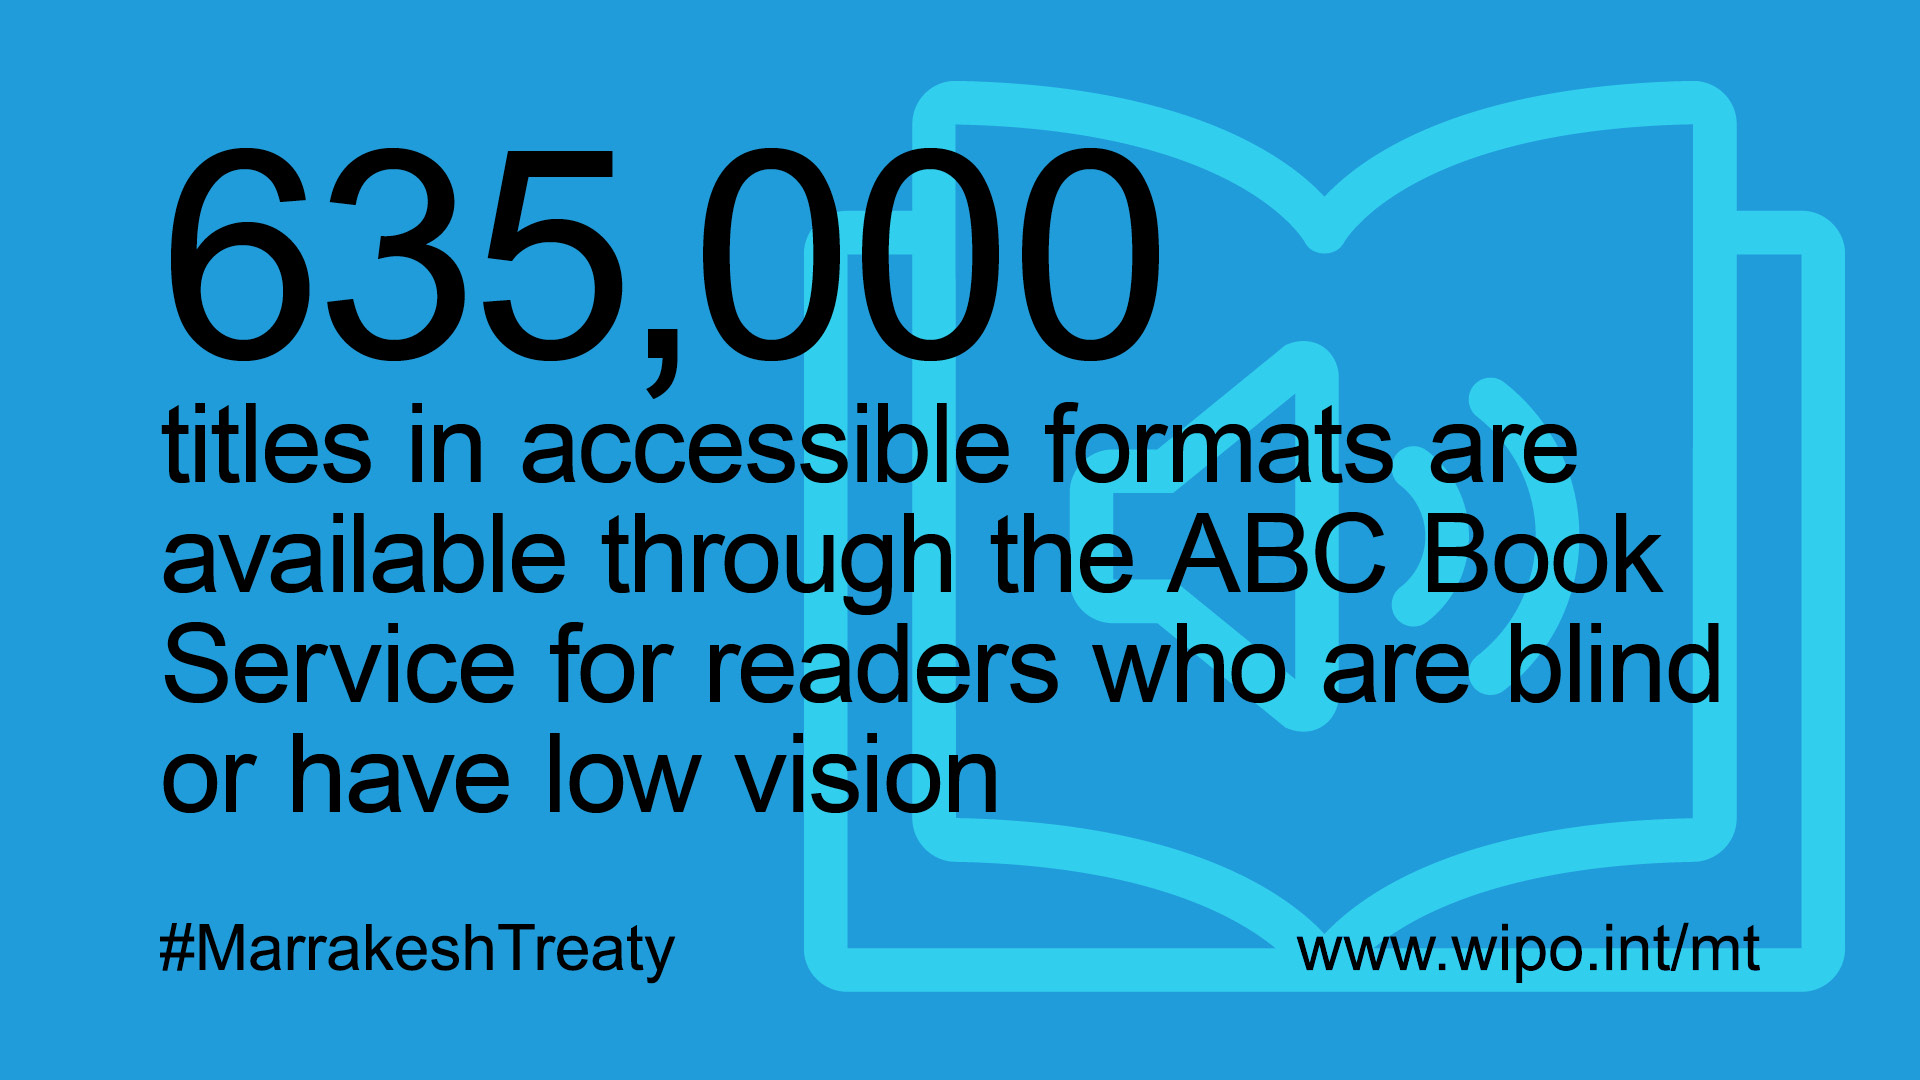 Quotecard: 635,000 titles in accessible formats are available through the ABC Book Service for readers who are blind or have low vision